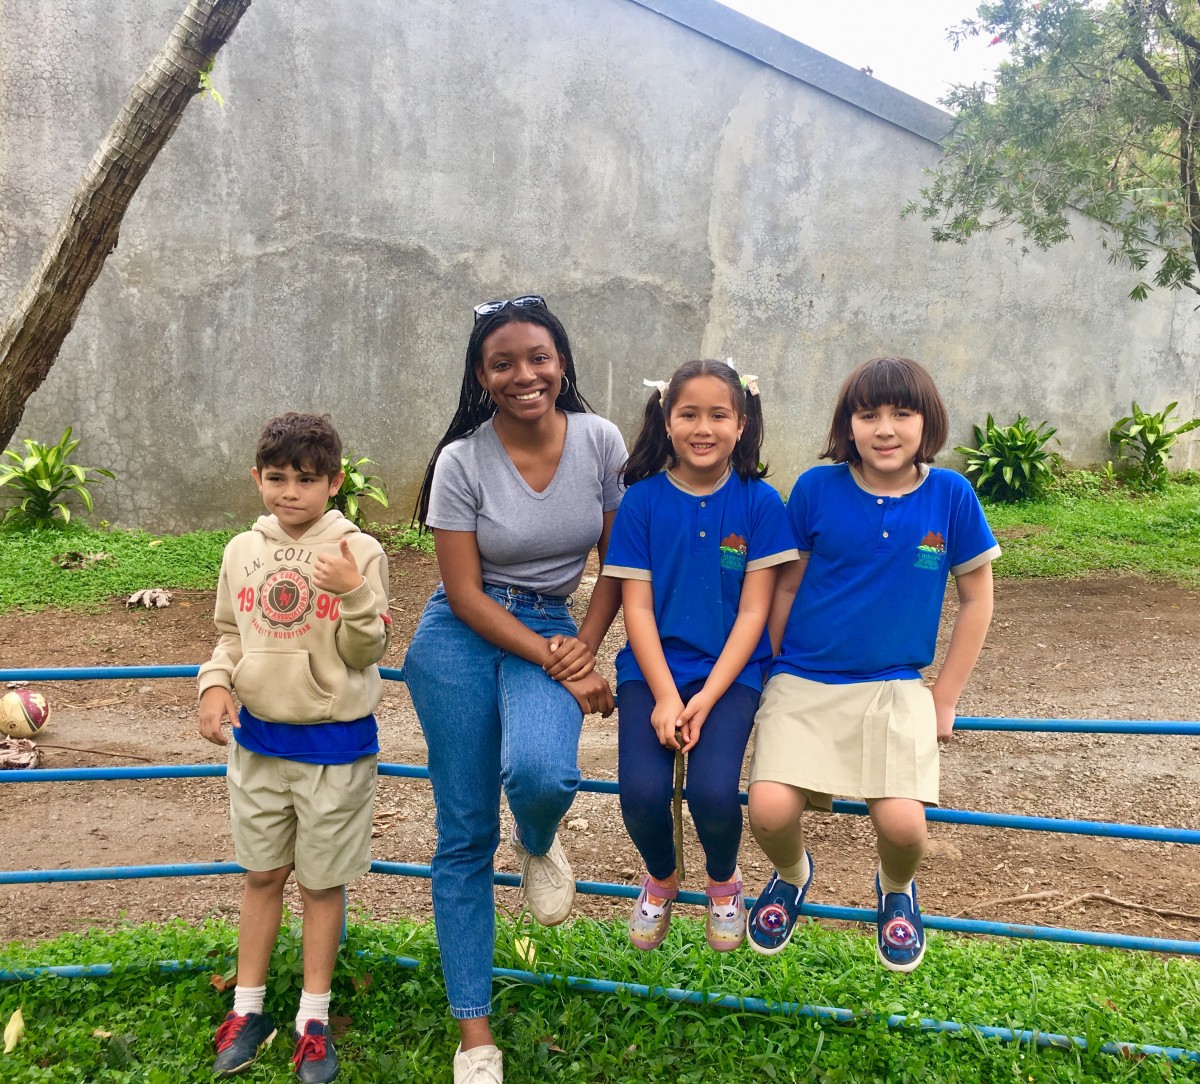 University of Texas student Mattison Gotcher with some of her students in Costa Rica